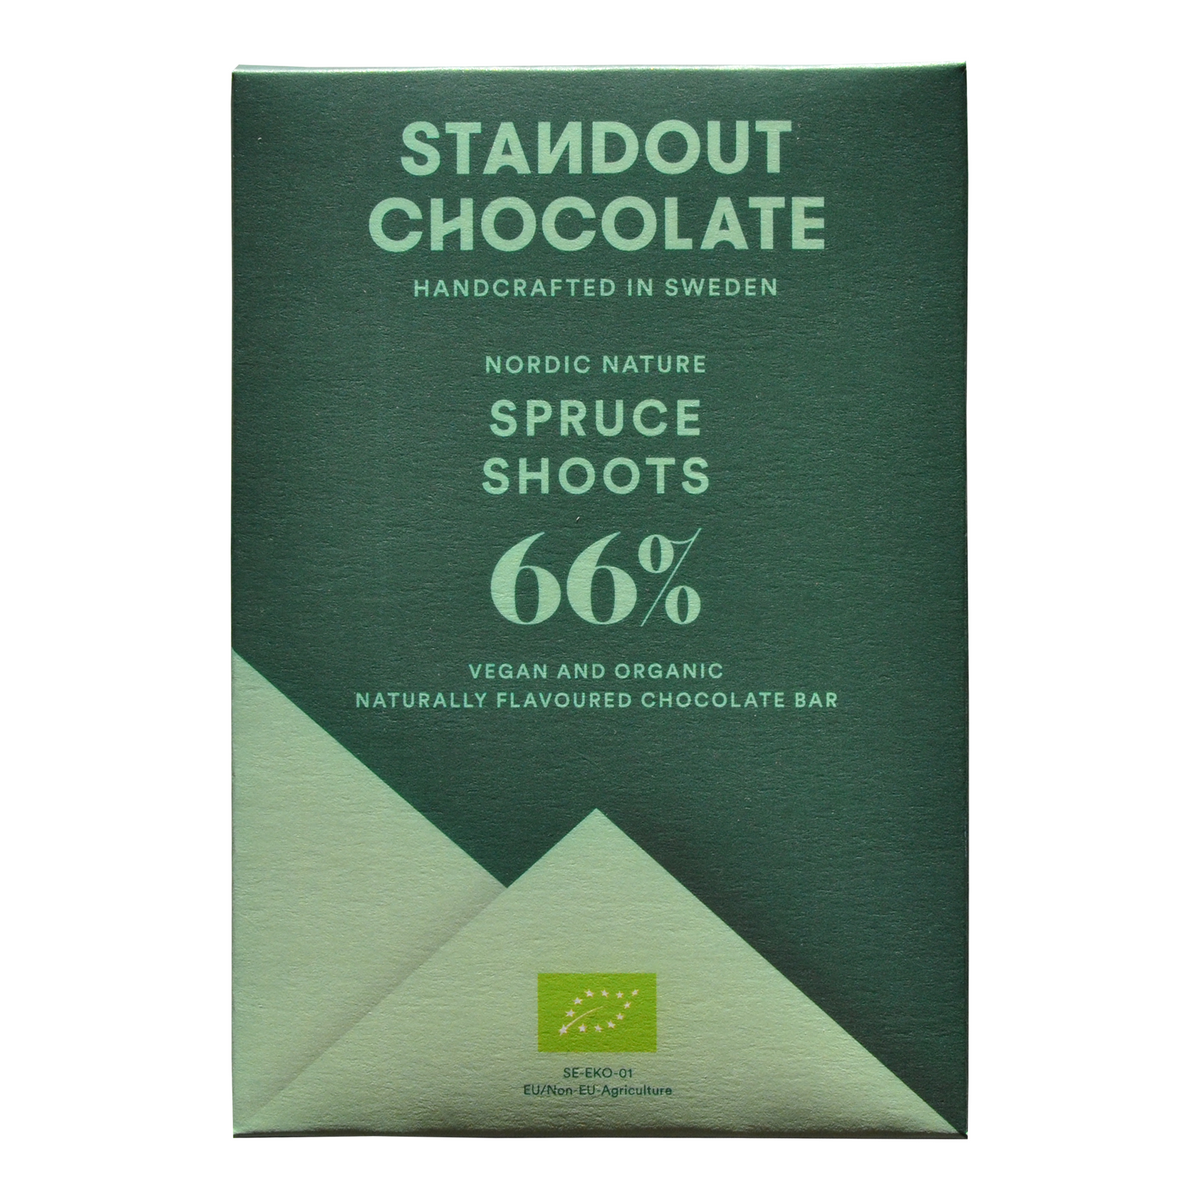 Standout Chocolate Nordic Nature Spruce Shoots 66%